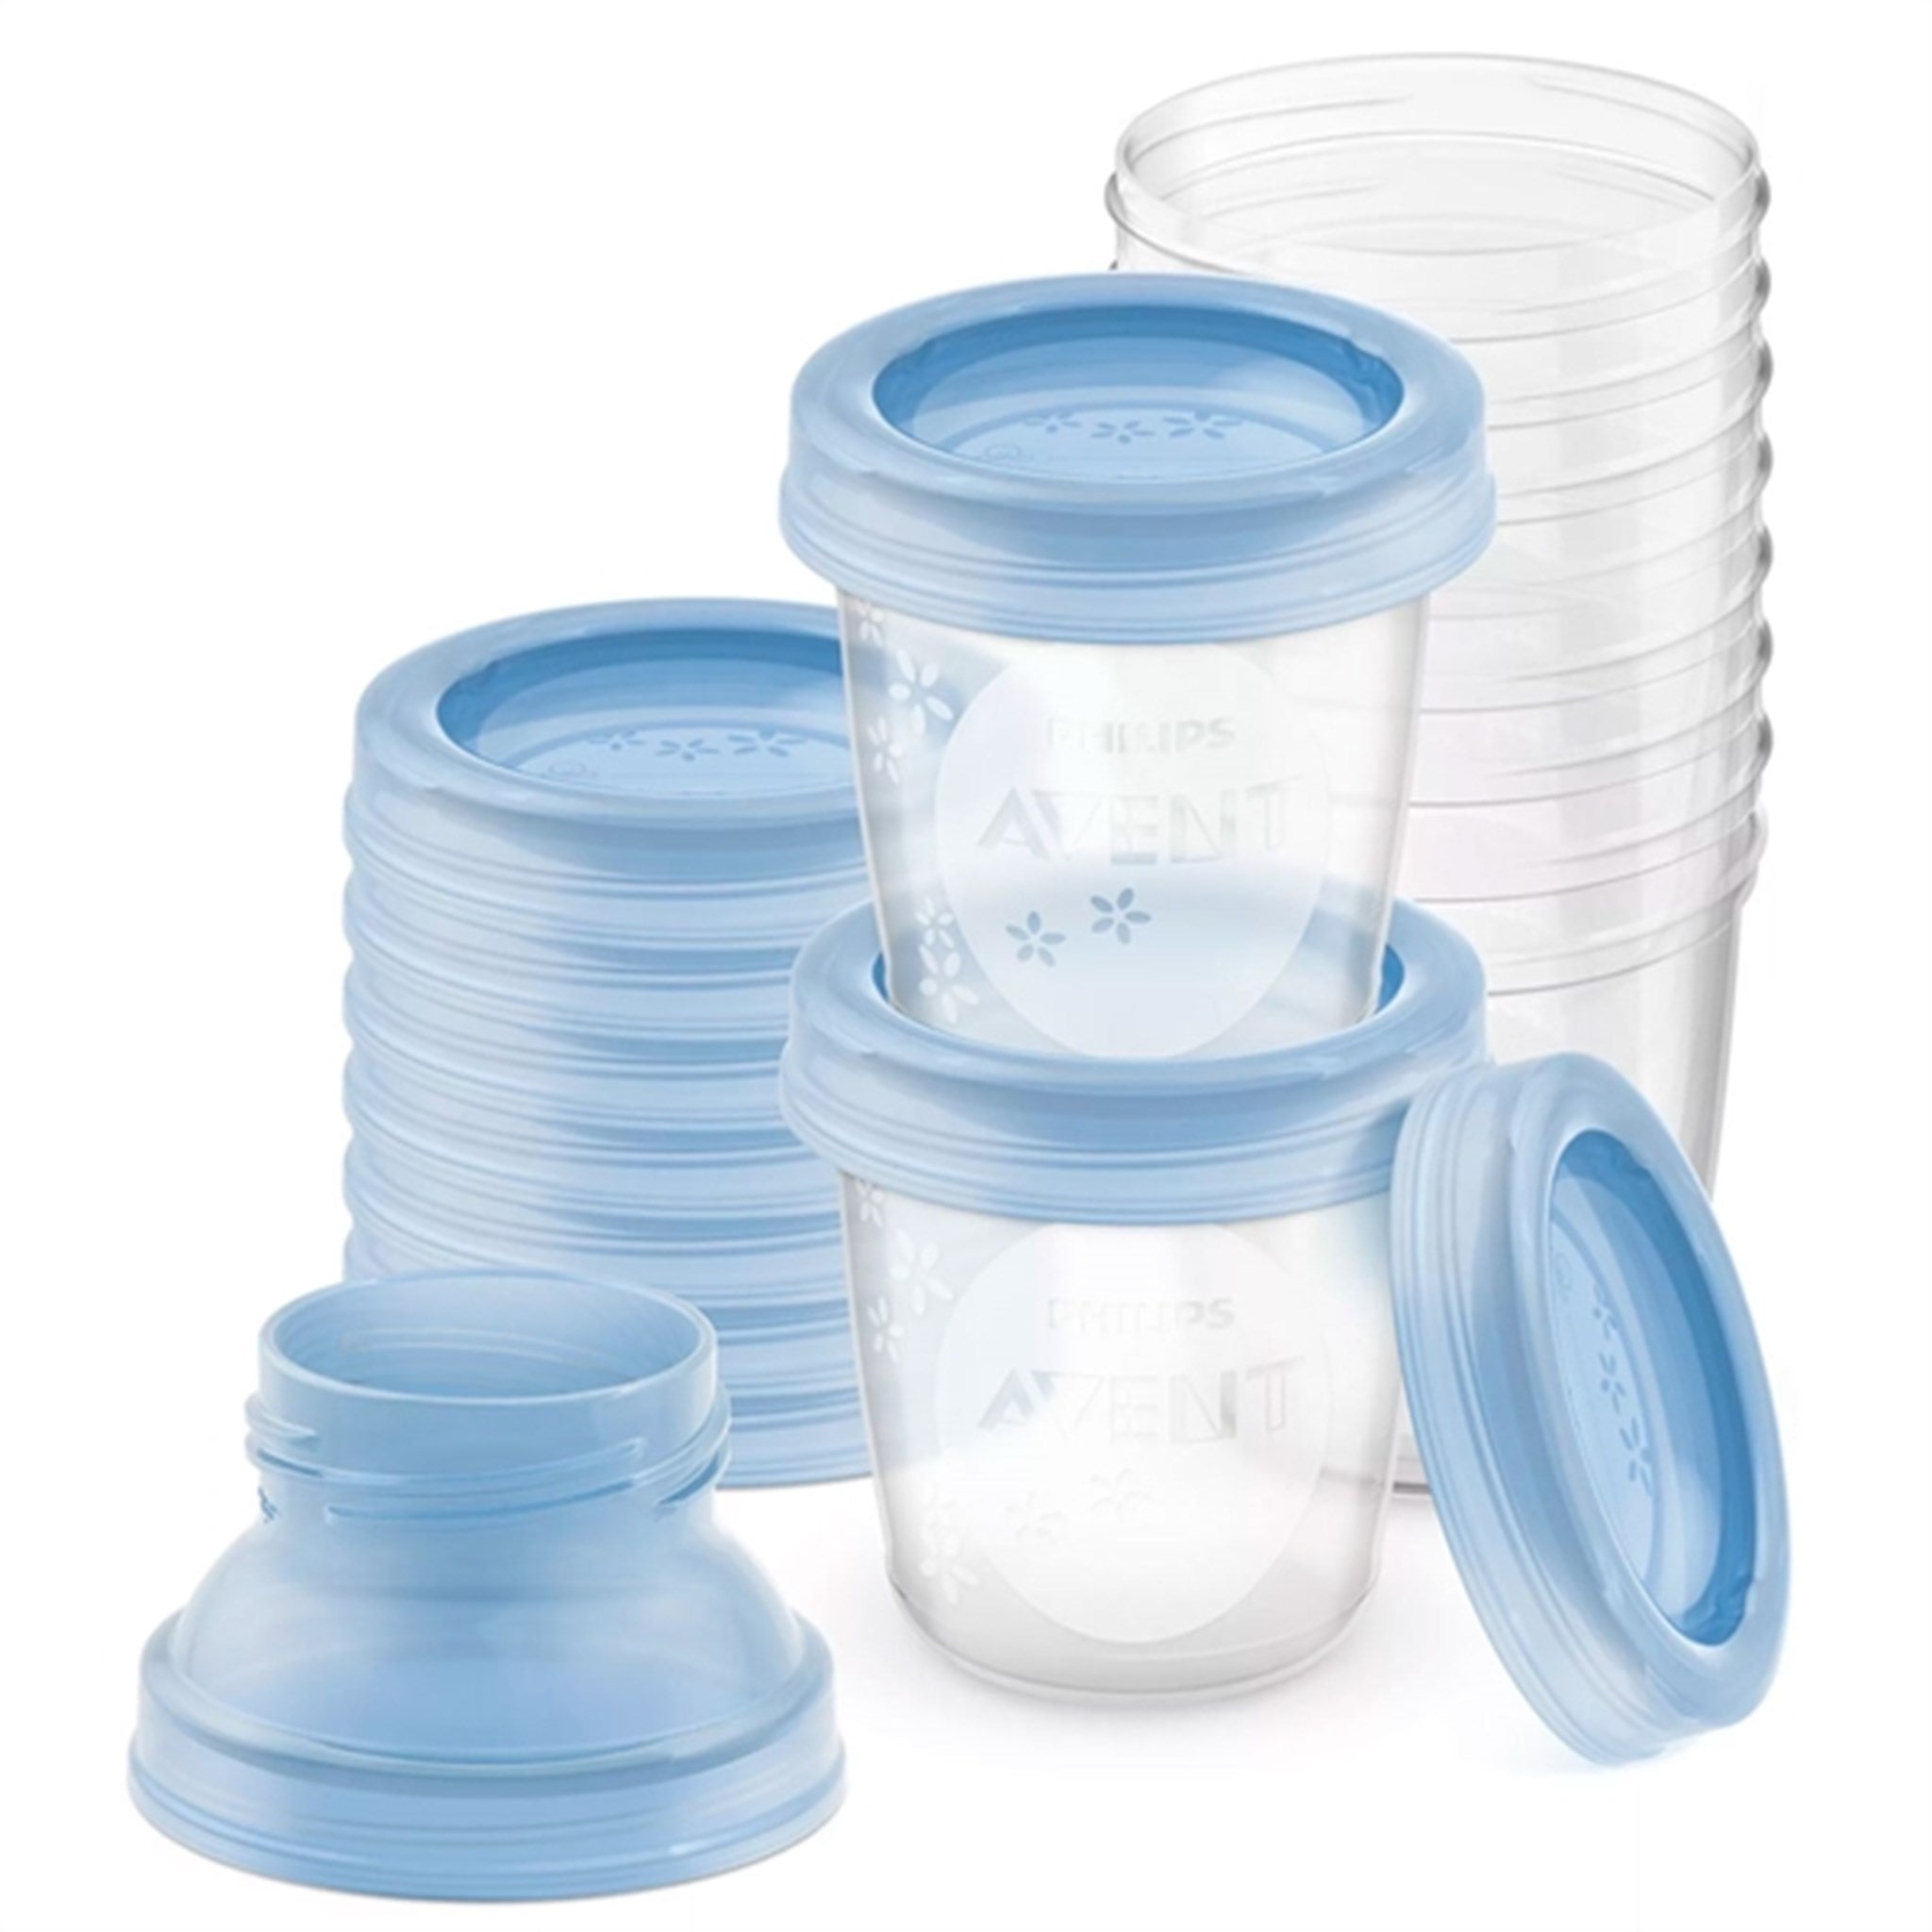 Philips Avent Breastmilk Storage Cups 180 ml 10 pcs.